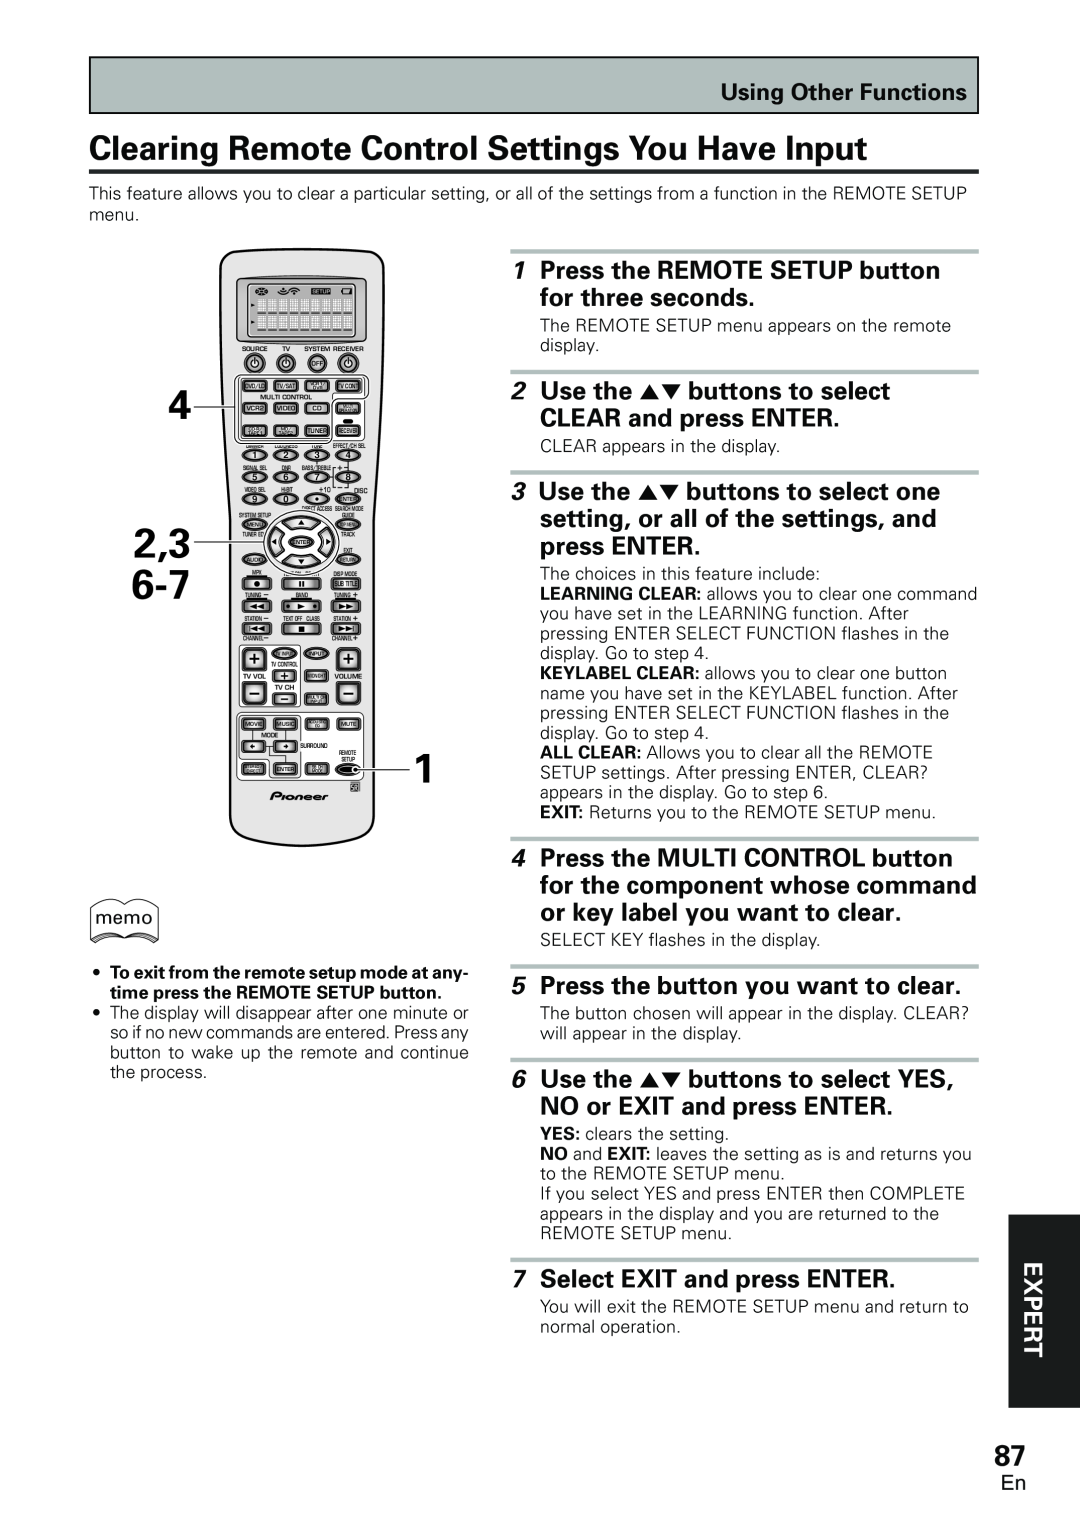 Pioneer VSX-D2011-S Clearing Remote Control Settings You Have Input, Press the REMOTE SETUP button, for three seconds 